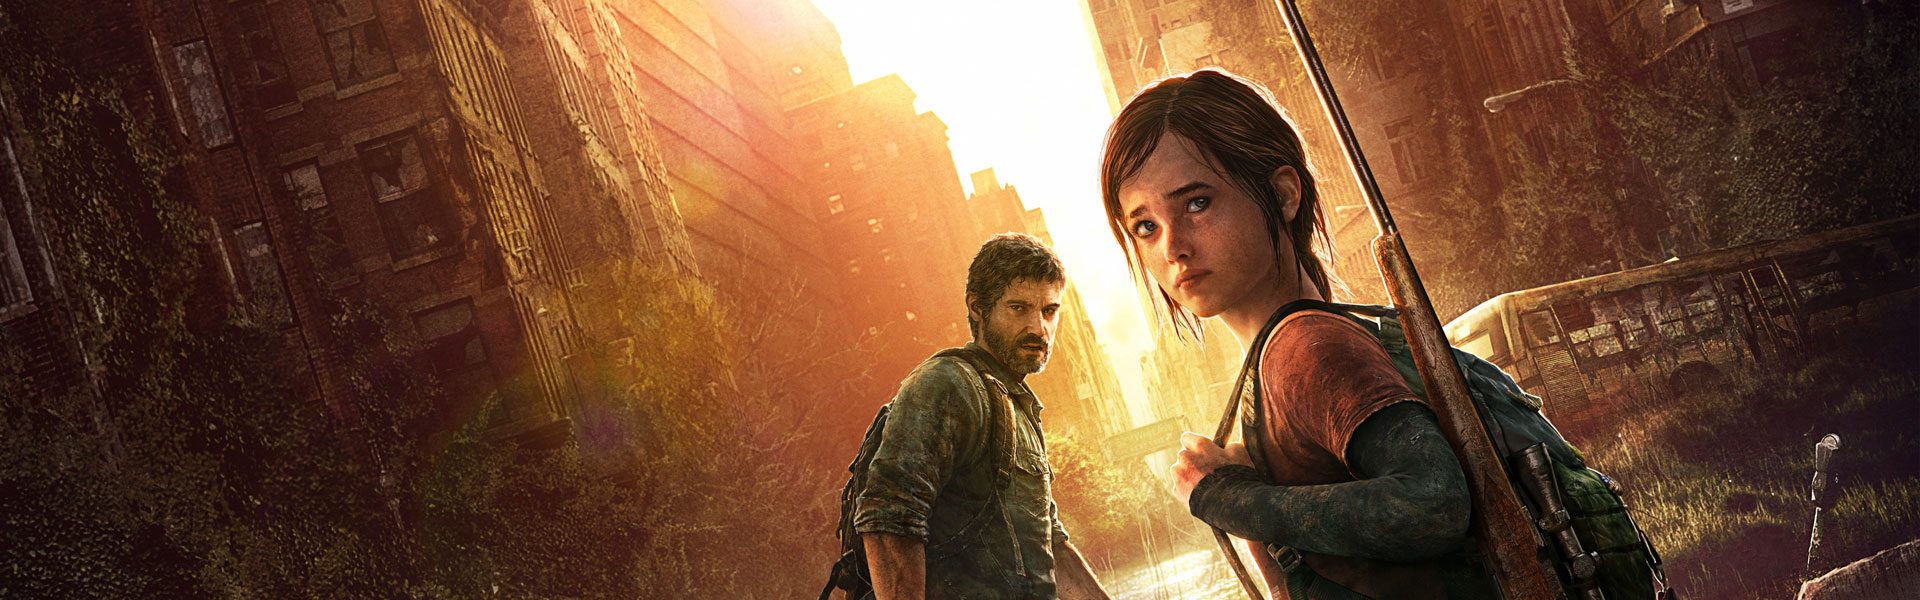 the last of us remastered discount code